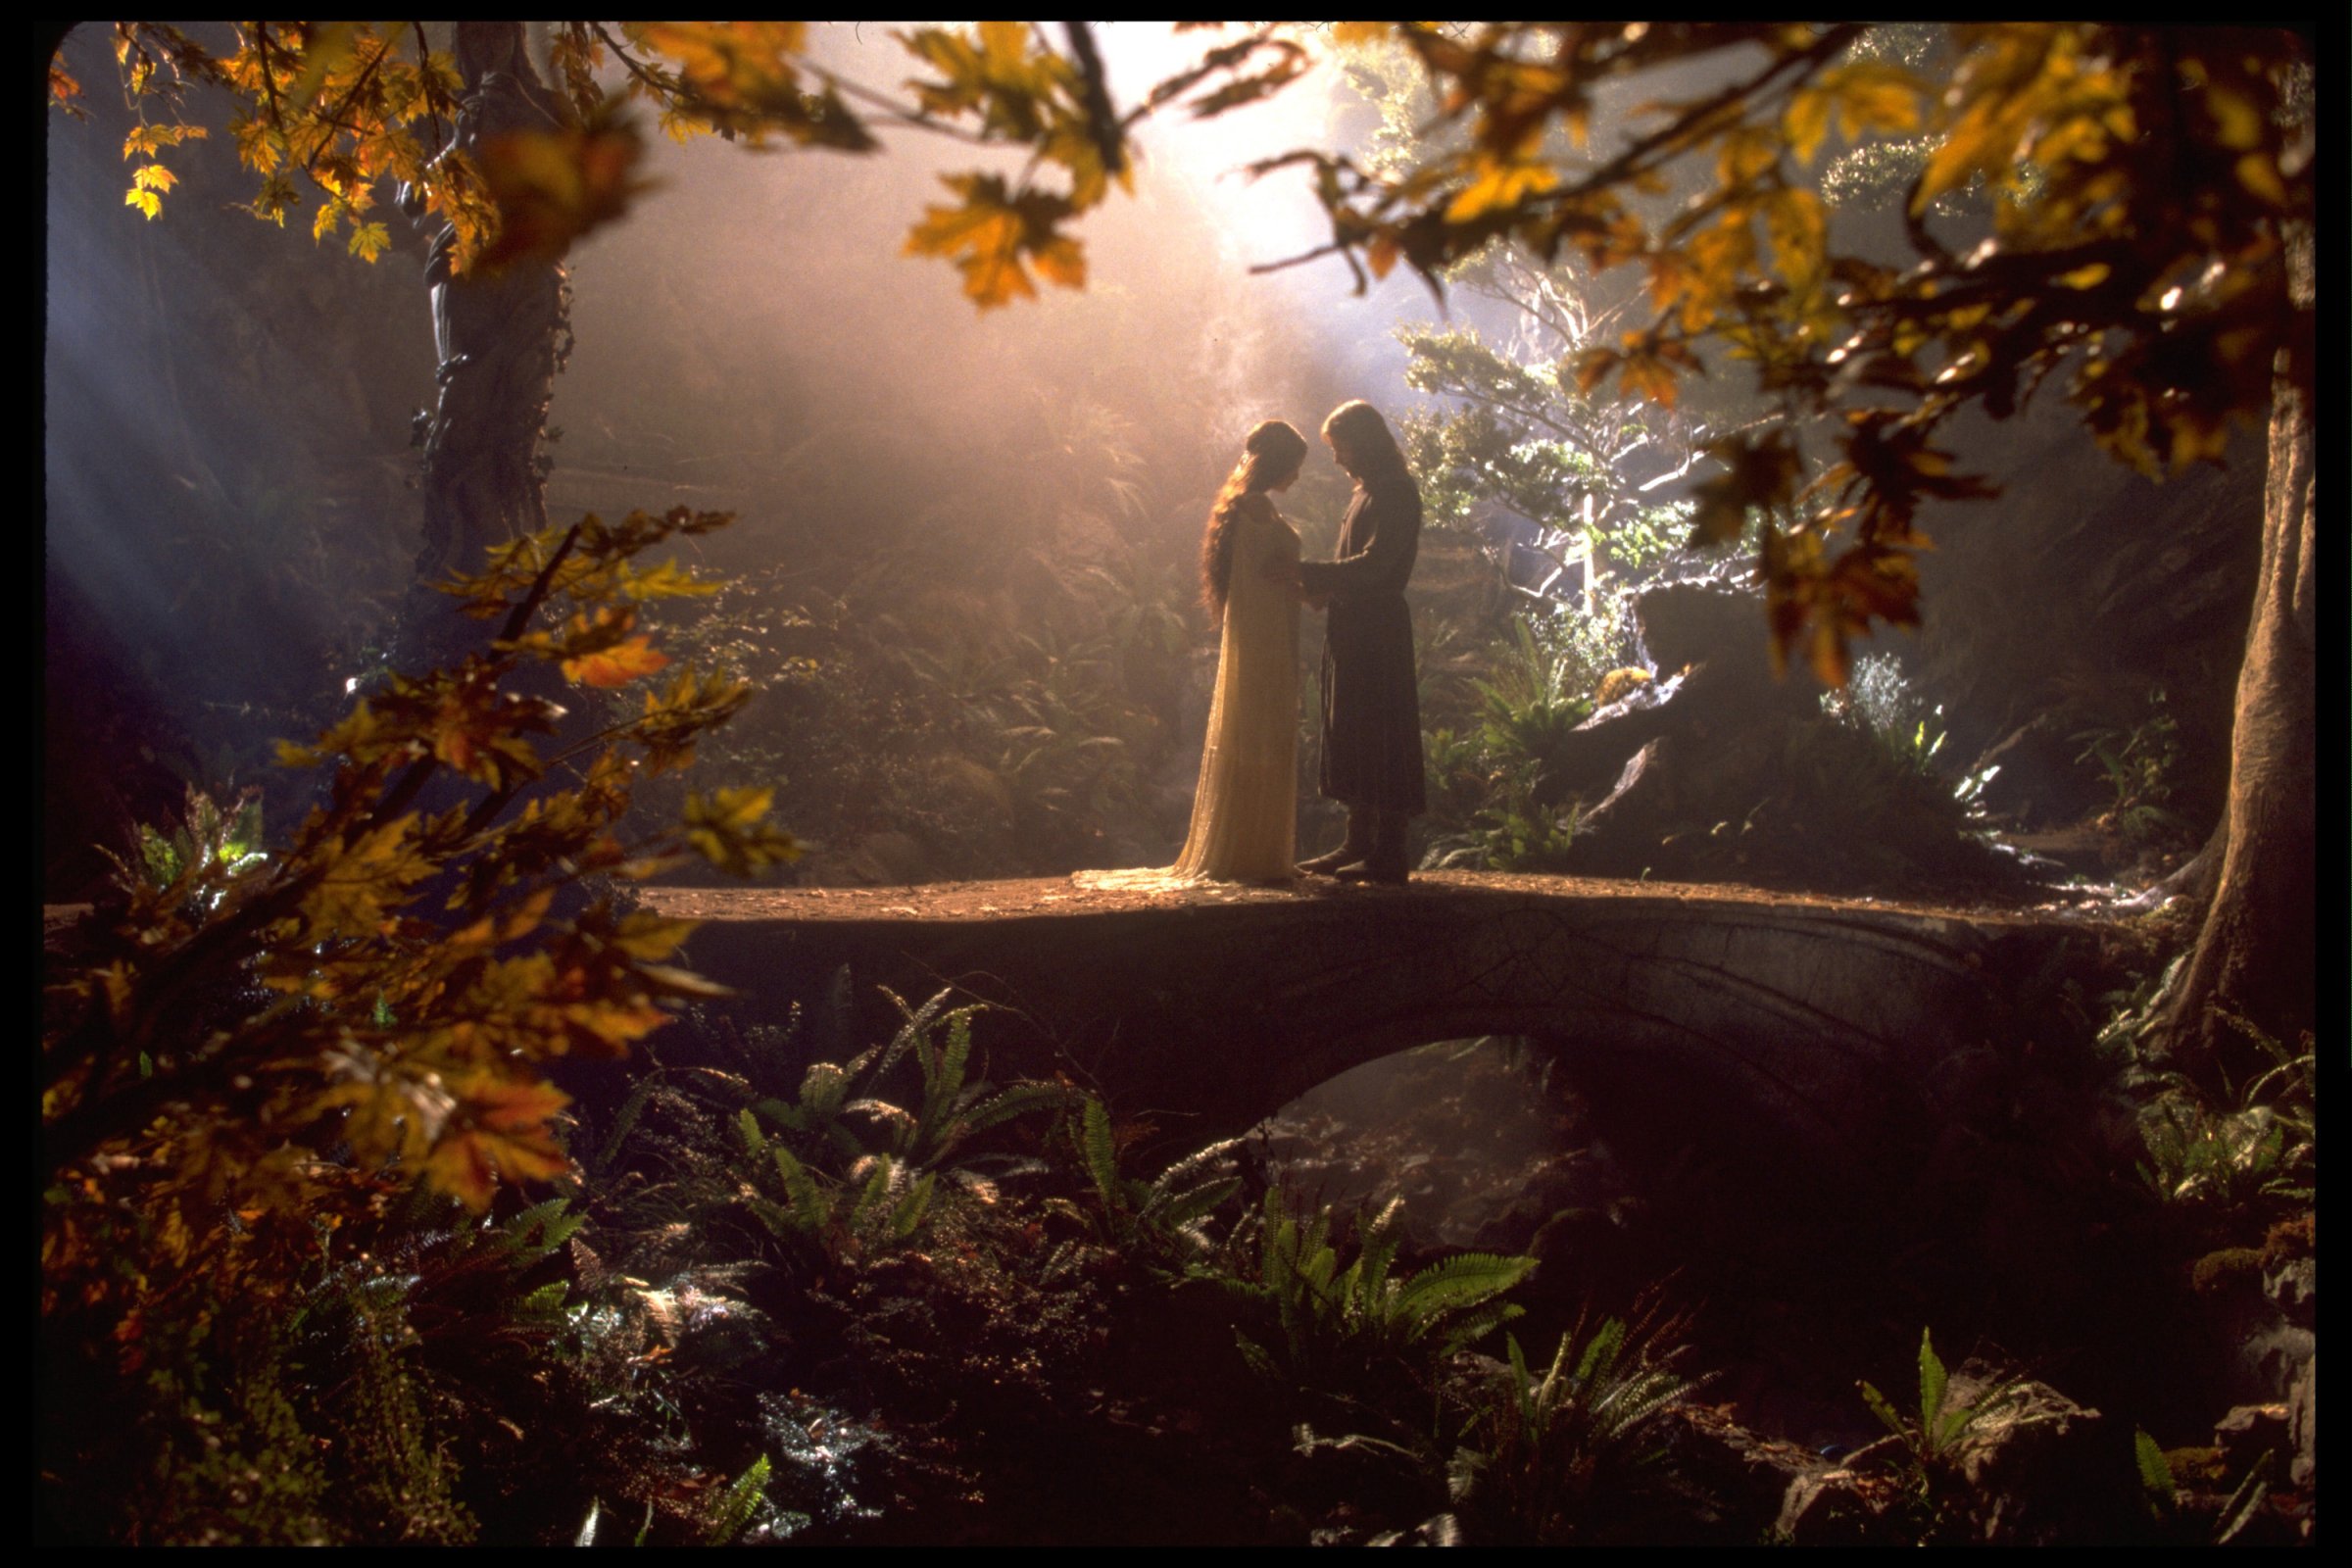 New Line Cinema's "Lord Of The Rings" Gets 13 Oscar Nominations